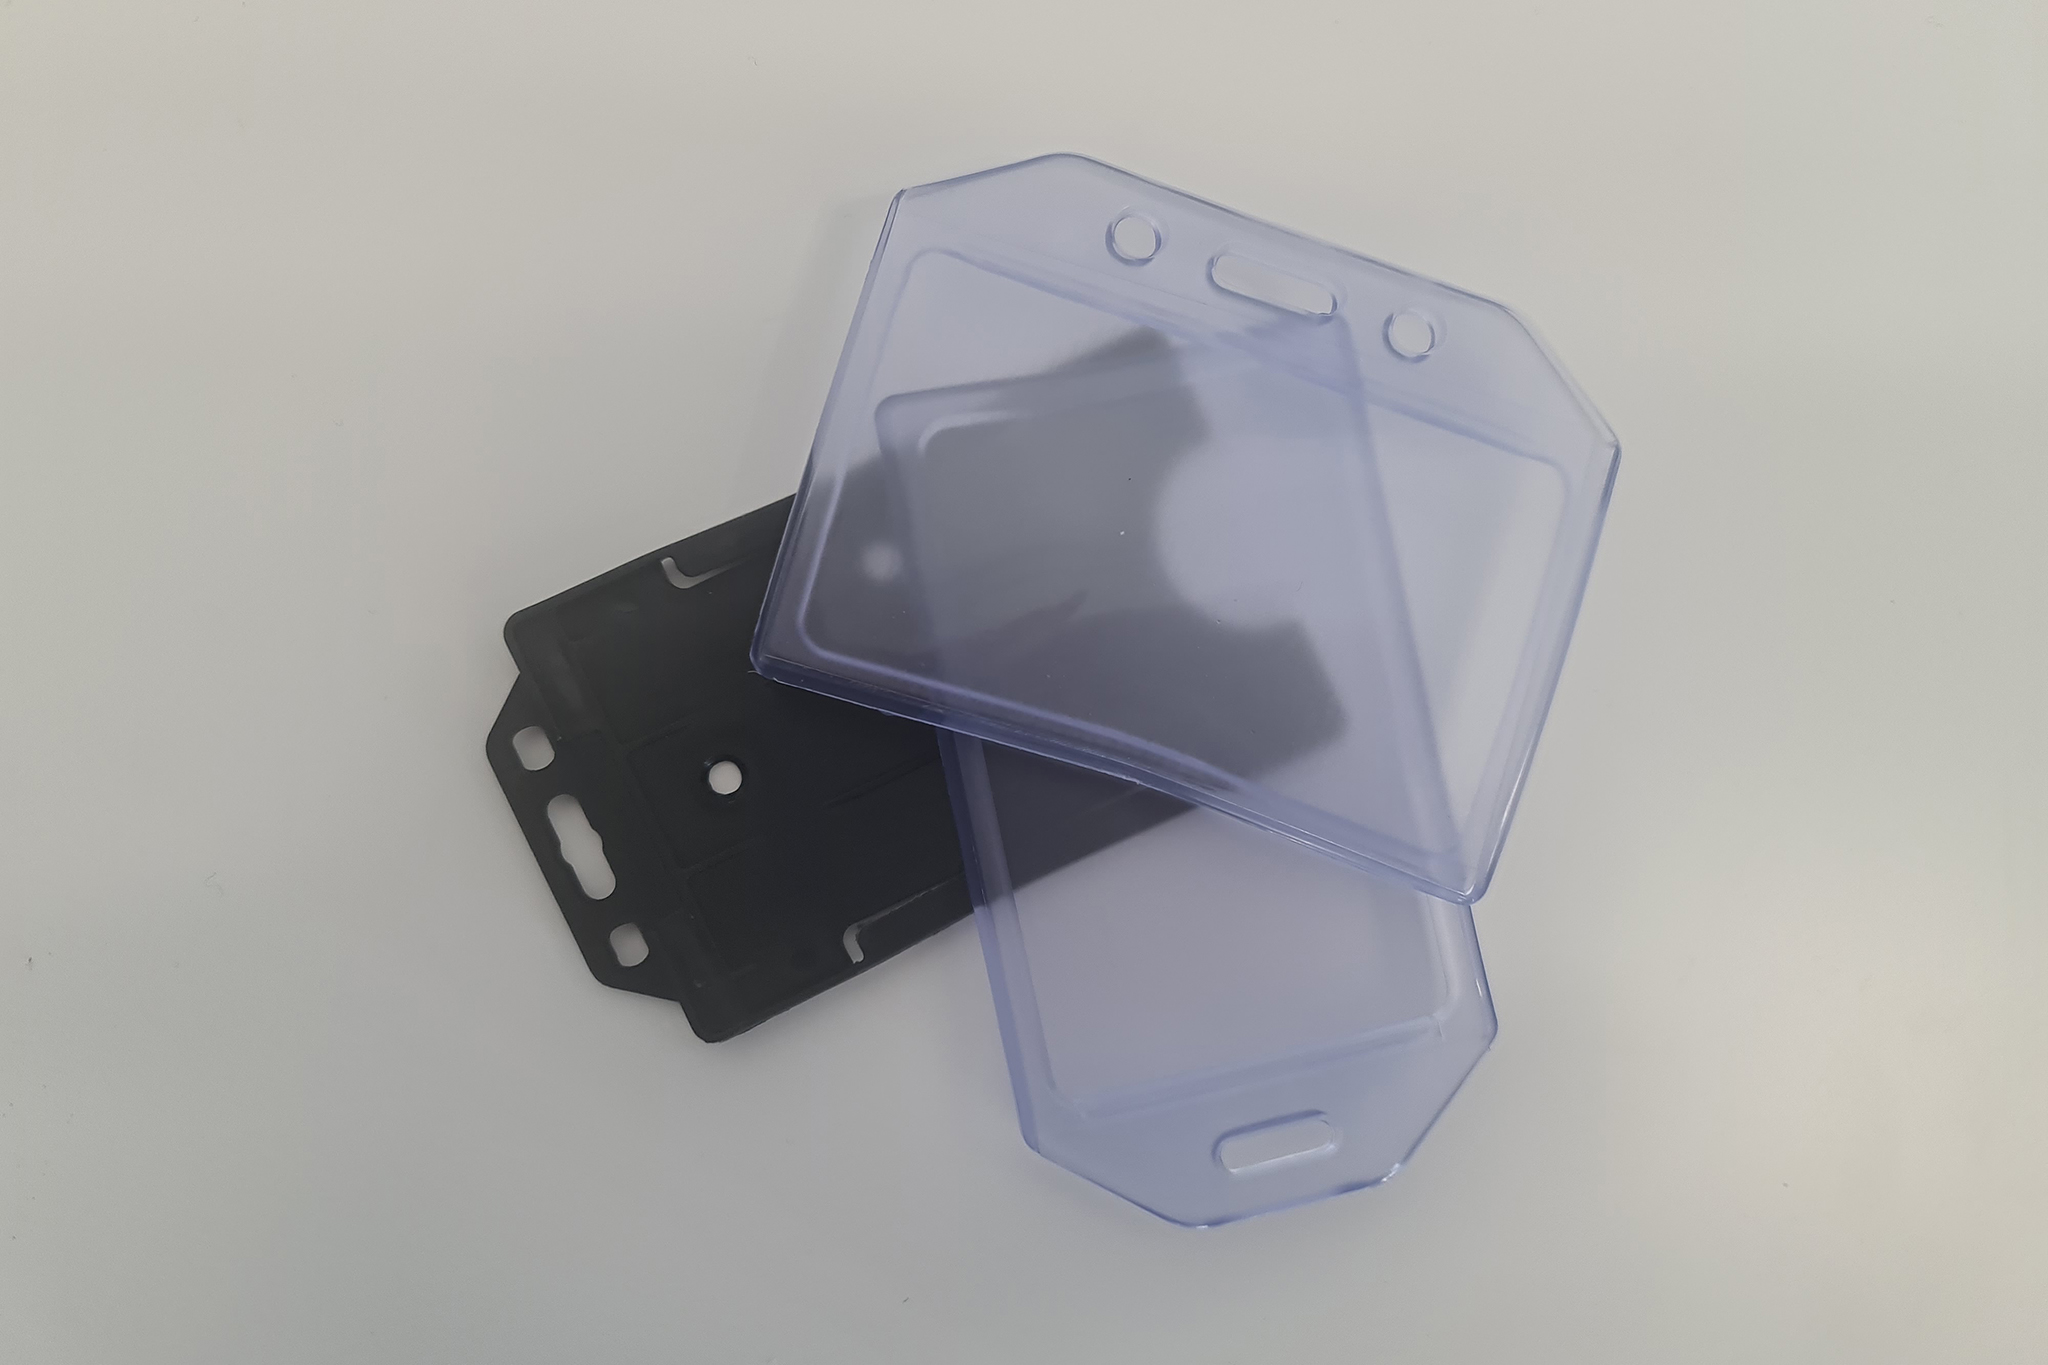 PVC and silicon ID card holders available from eCardz New Zealand